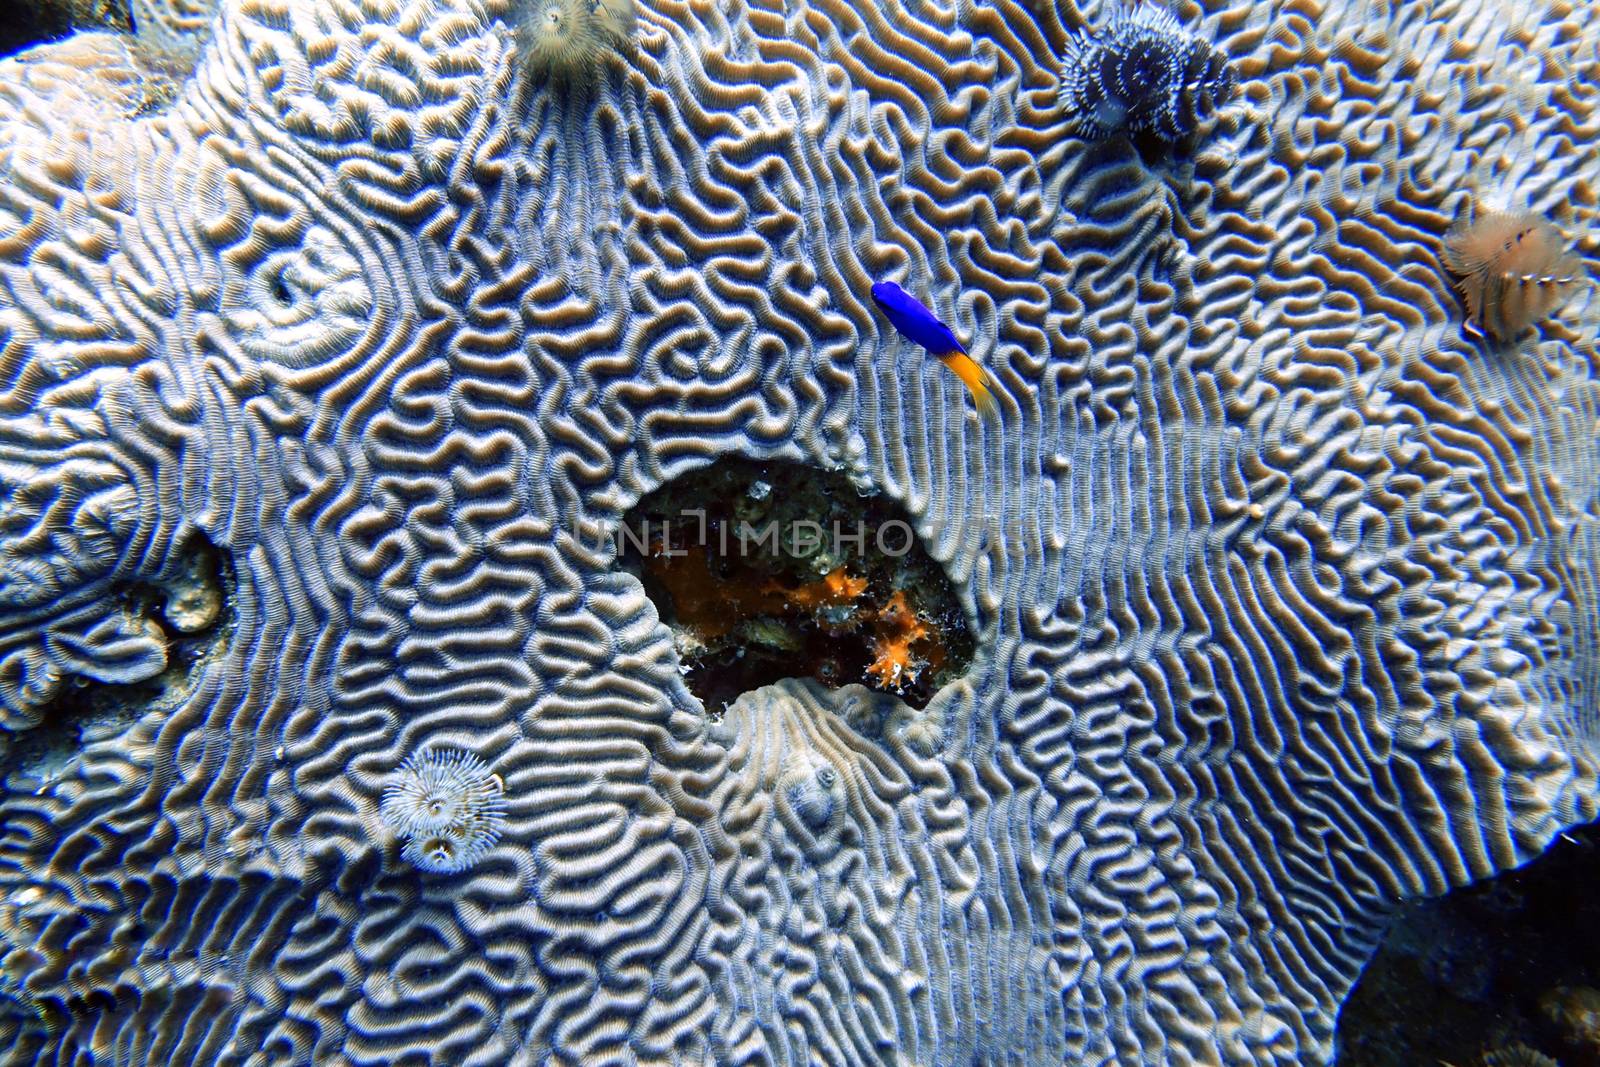 An underwater photo of a Cocoa Damselfish next to coral.